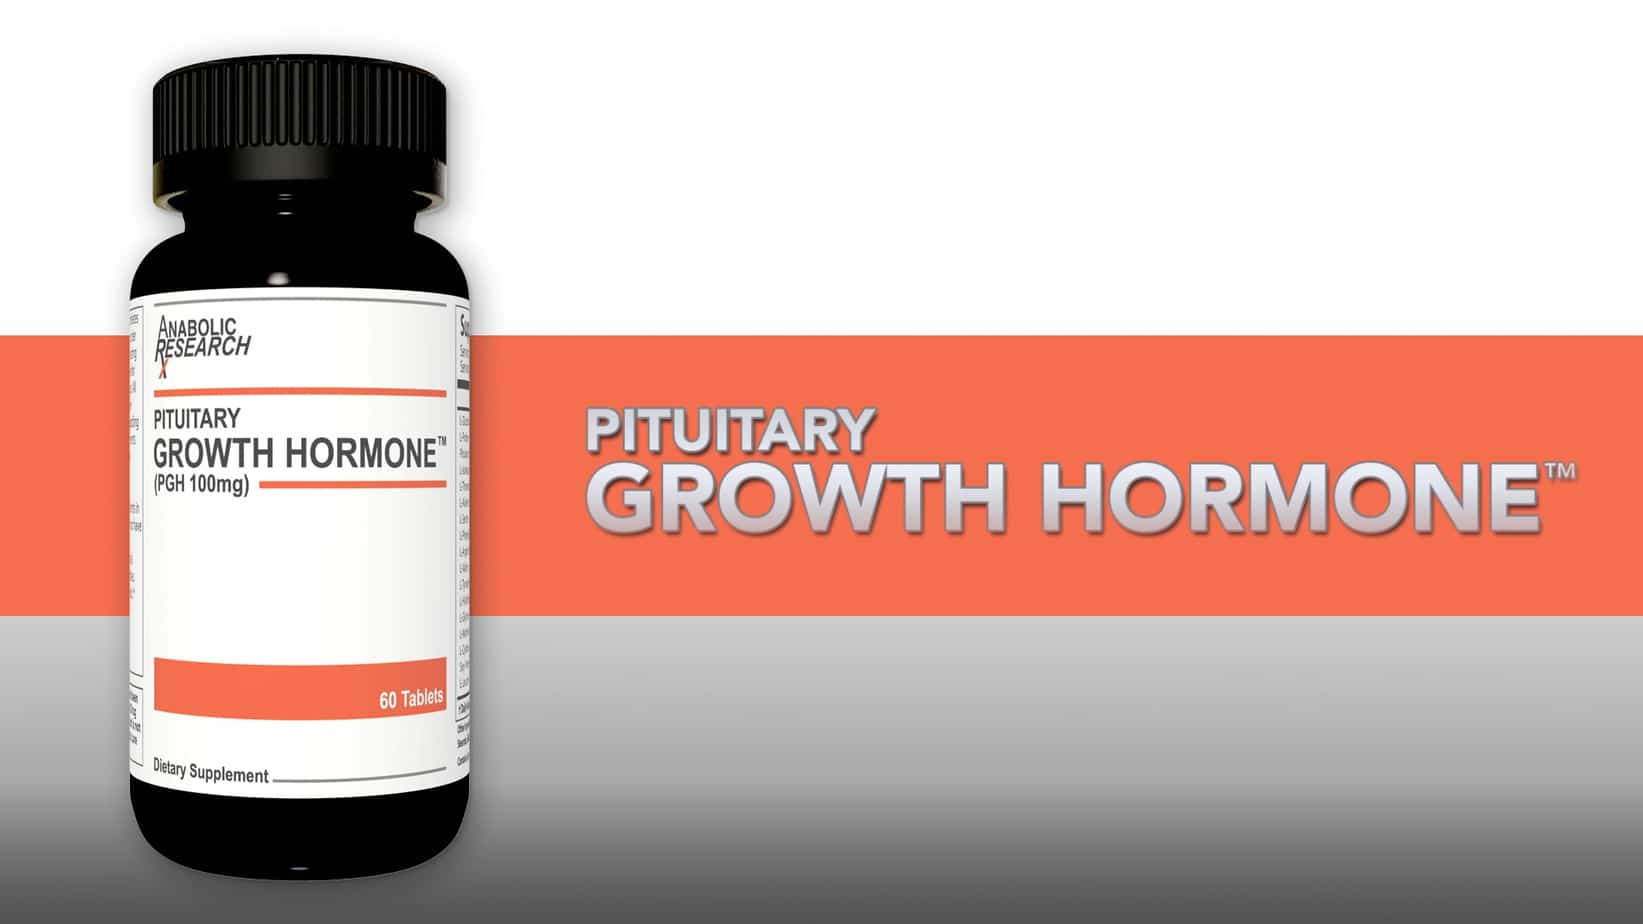 Pituitary Growth Hormone